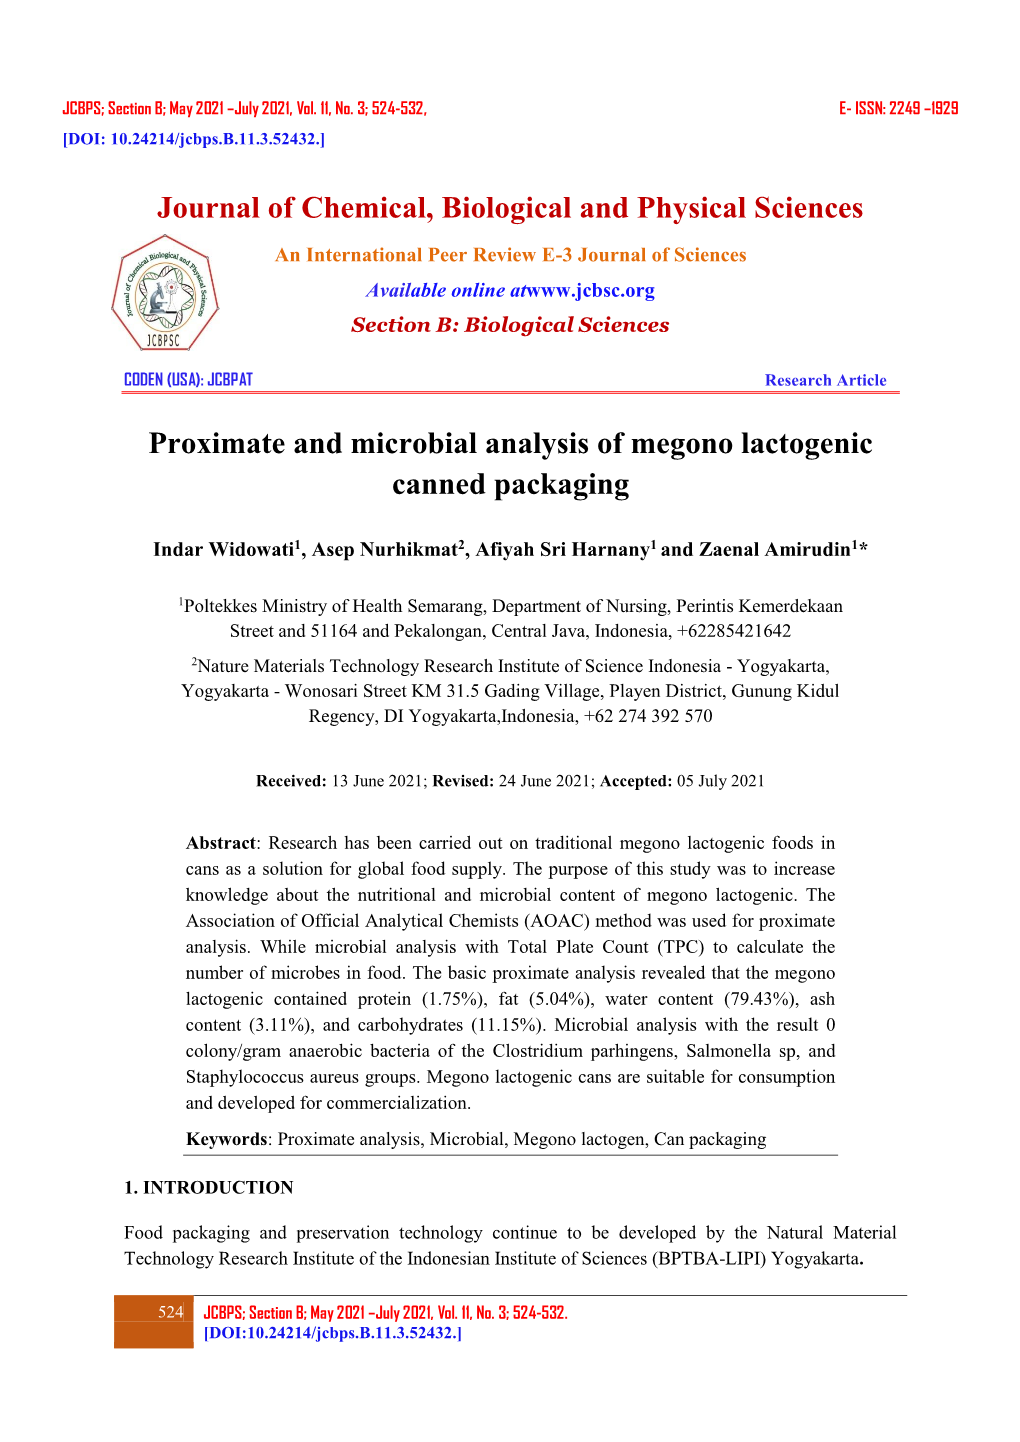 Proximate and Microbial Analysis of Megono Lactogenic Canned Packaging